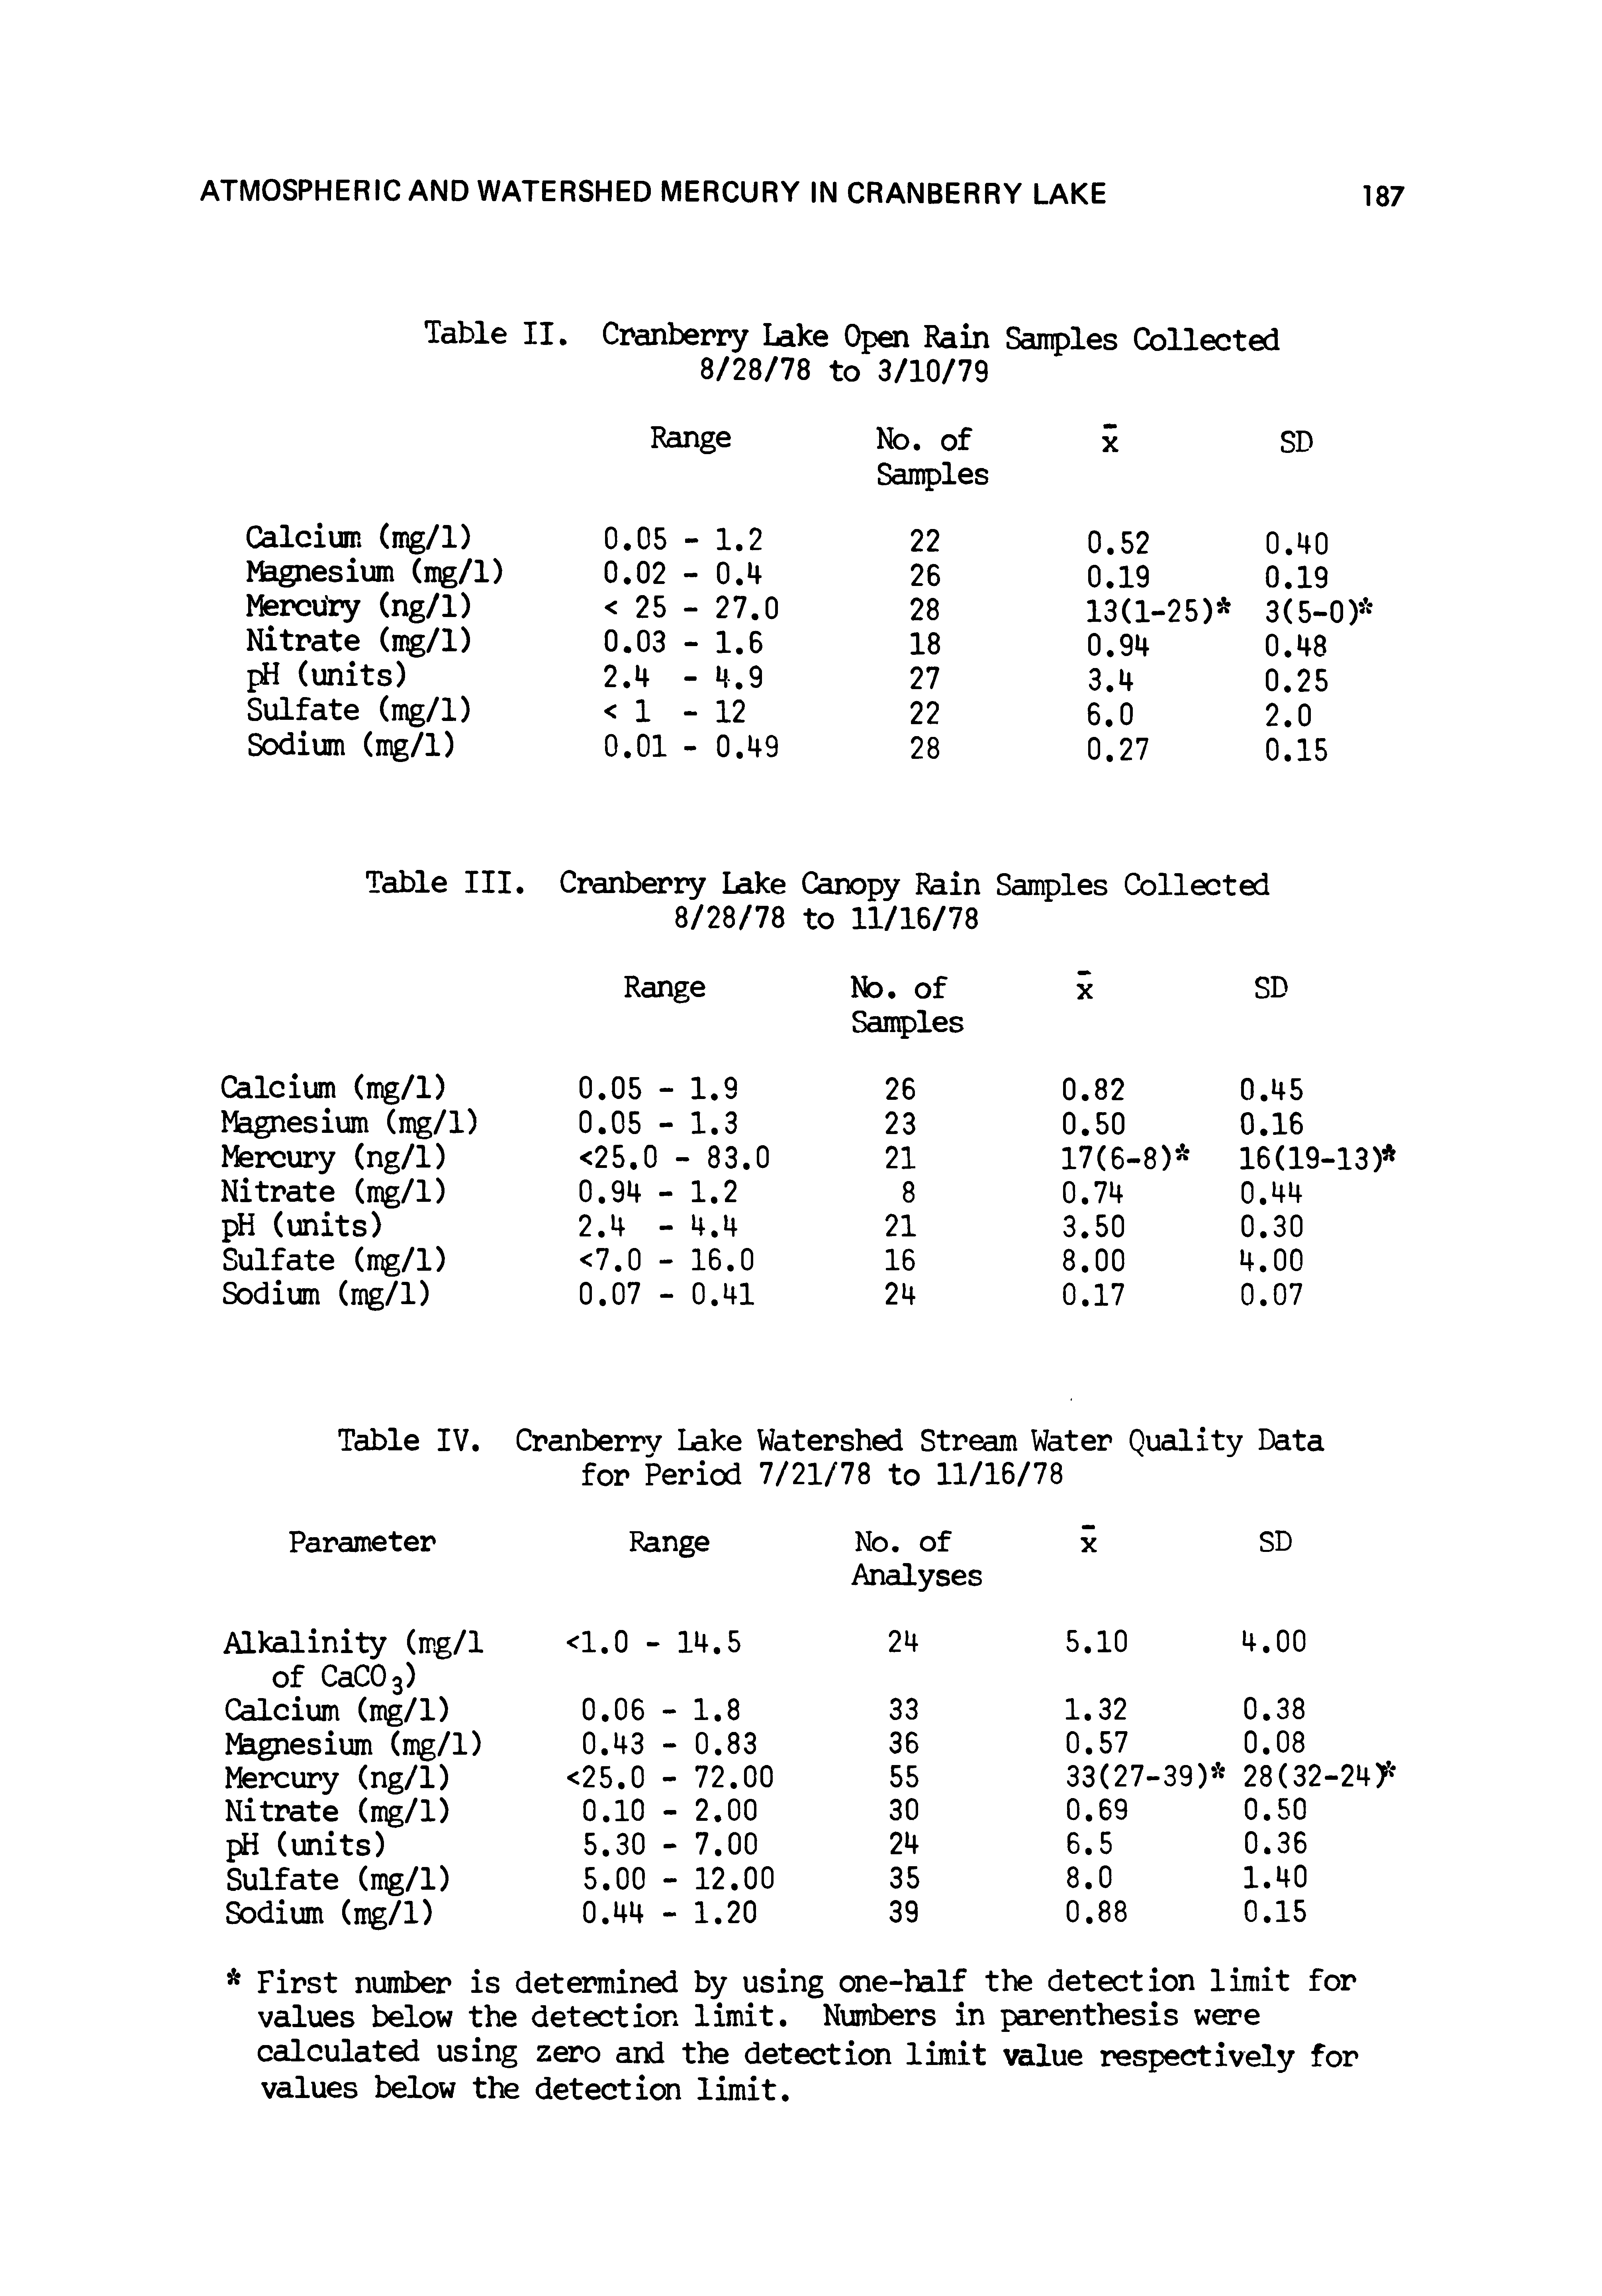 Table IV. Cranberry Lake Watershed Stream Water Quality Data for Period 7/21/78 to 11/16/78...